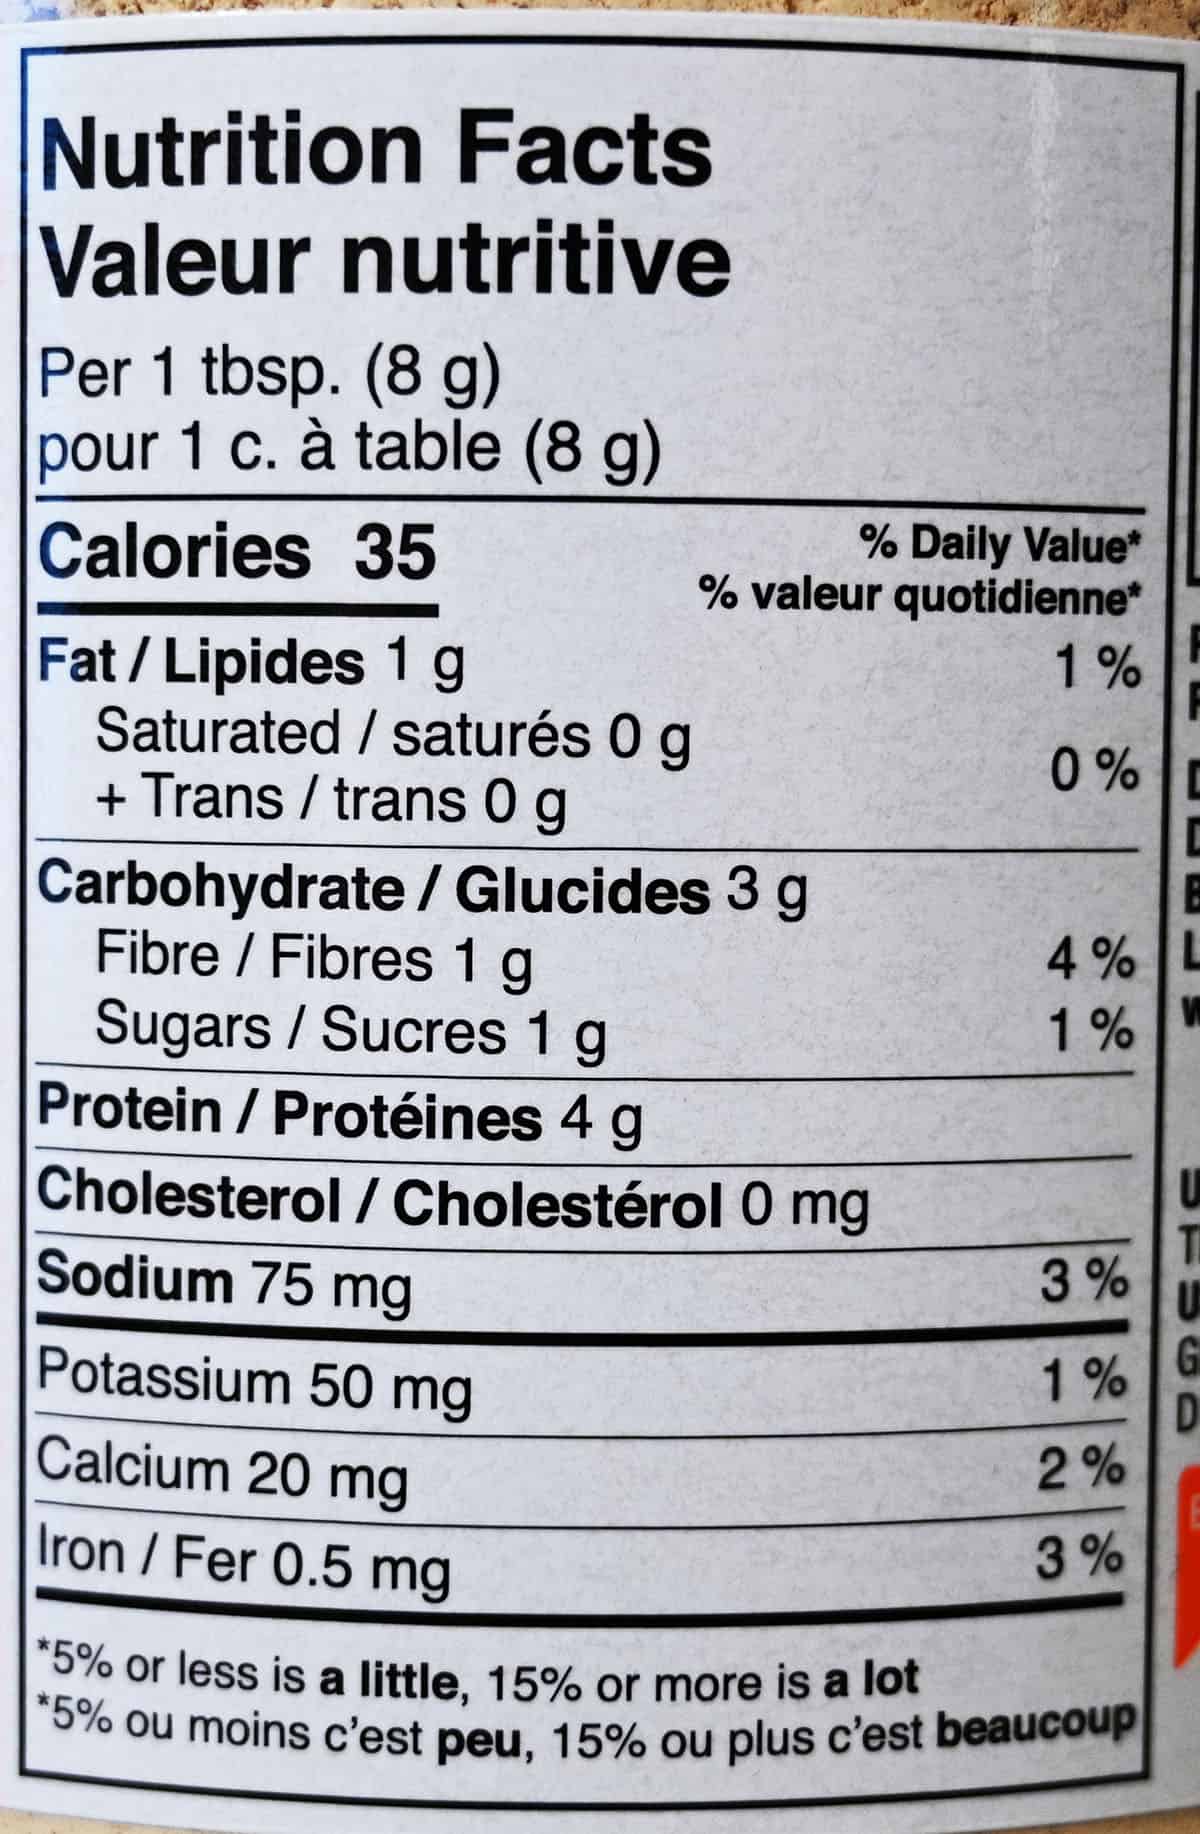 Image of the nutrition facts from the back of the container.